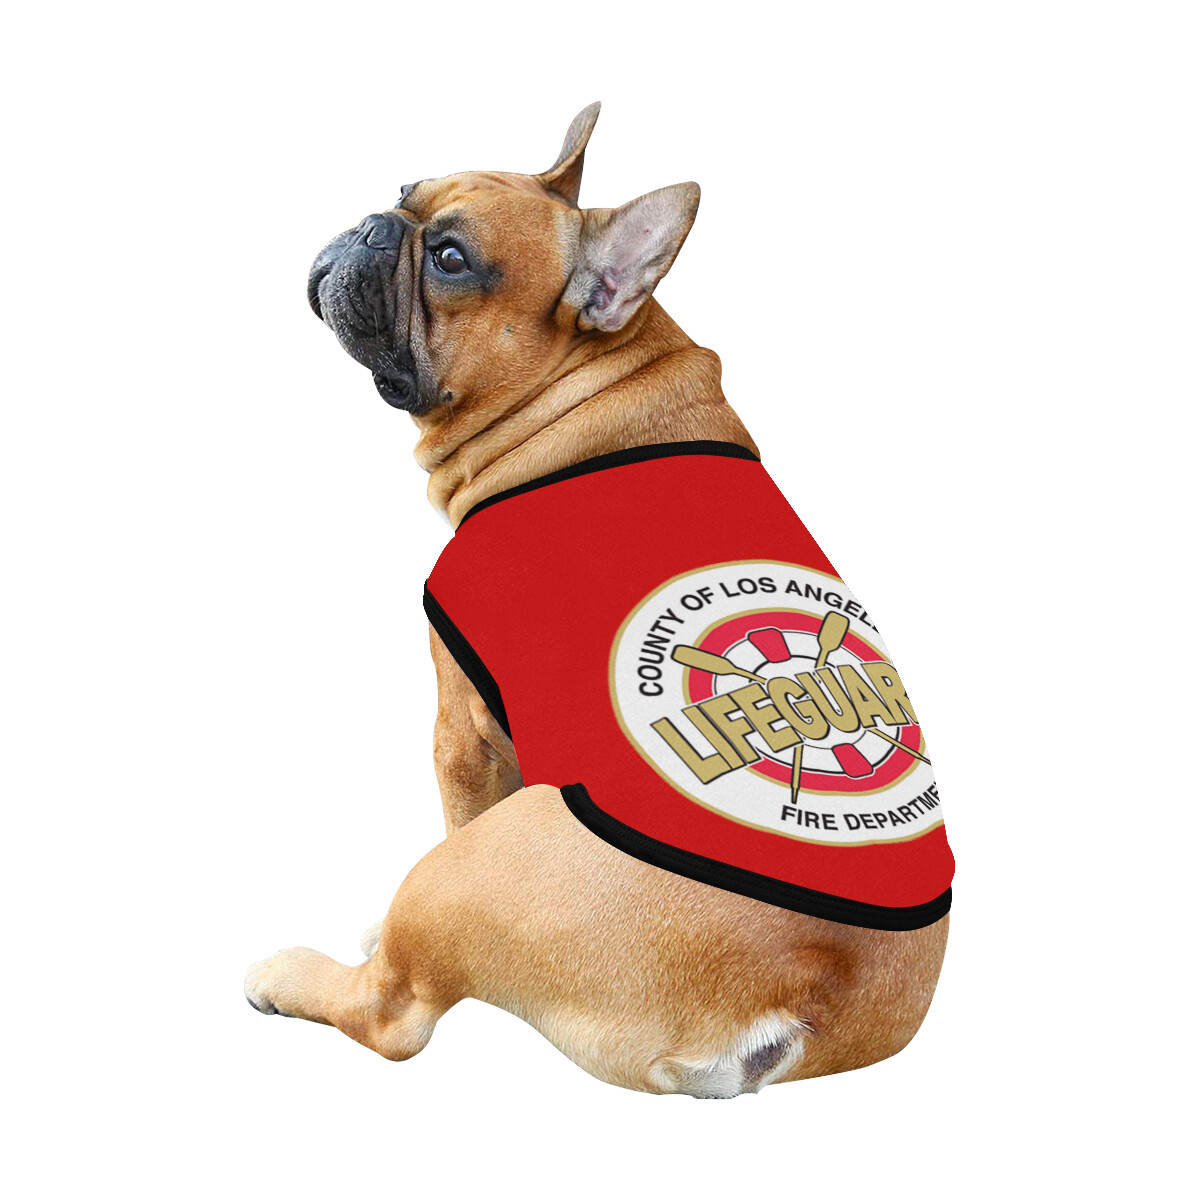 🐕 Lifeguard LAFD Los Angeles Fire Department Dog shirt, Dog Tank Top, Dog t-shirt, Dog clothes, Gifts, front back print, 7 sizes XS to 3XL, dog gifts, red